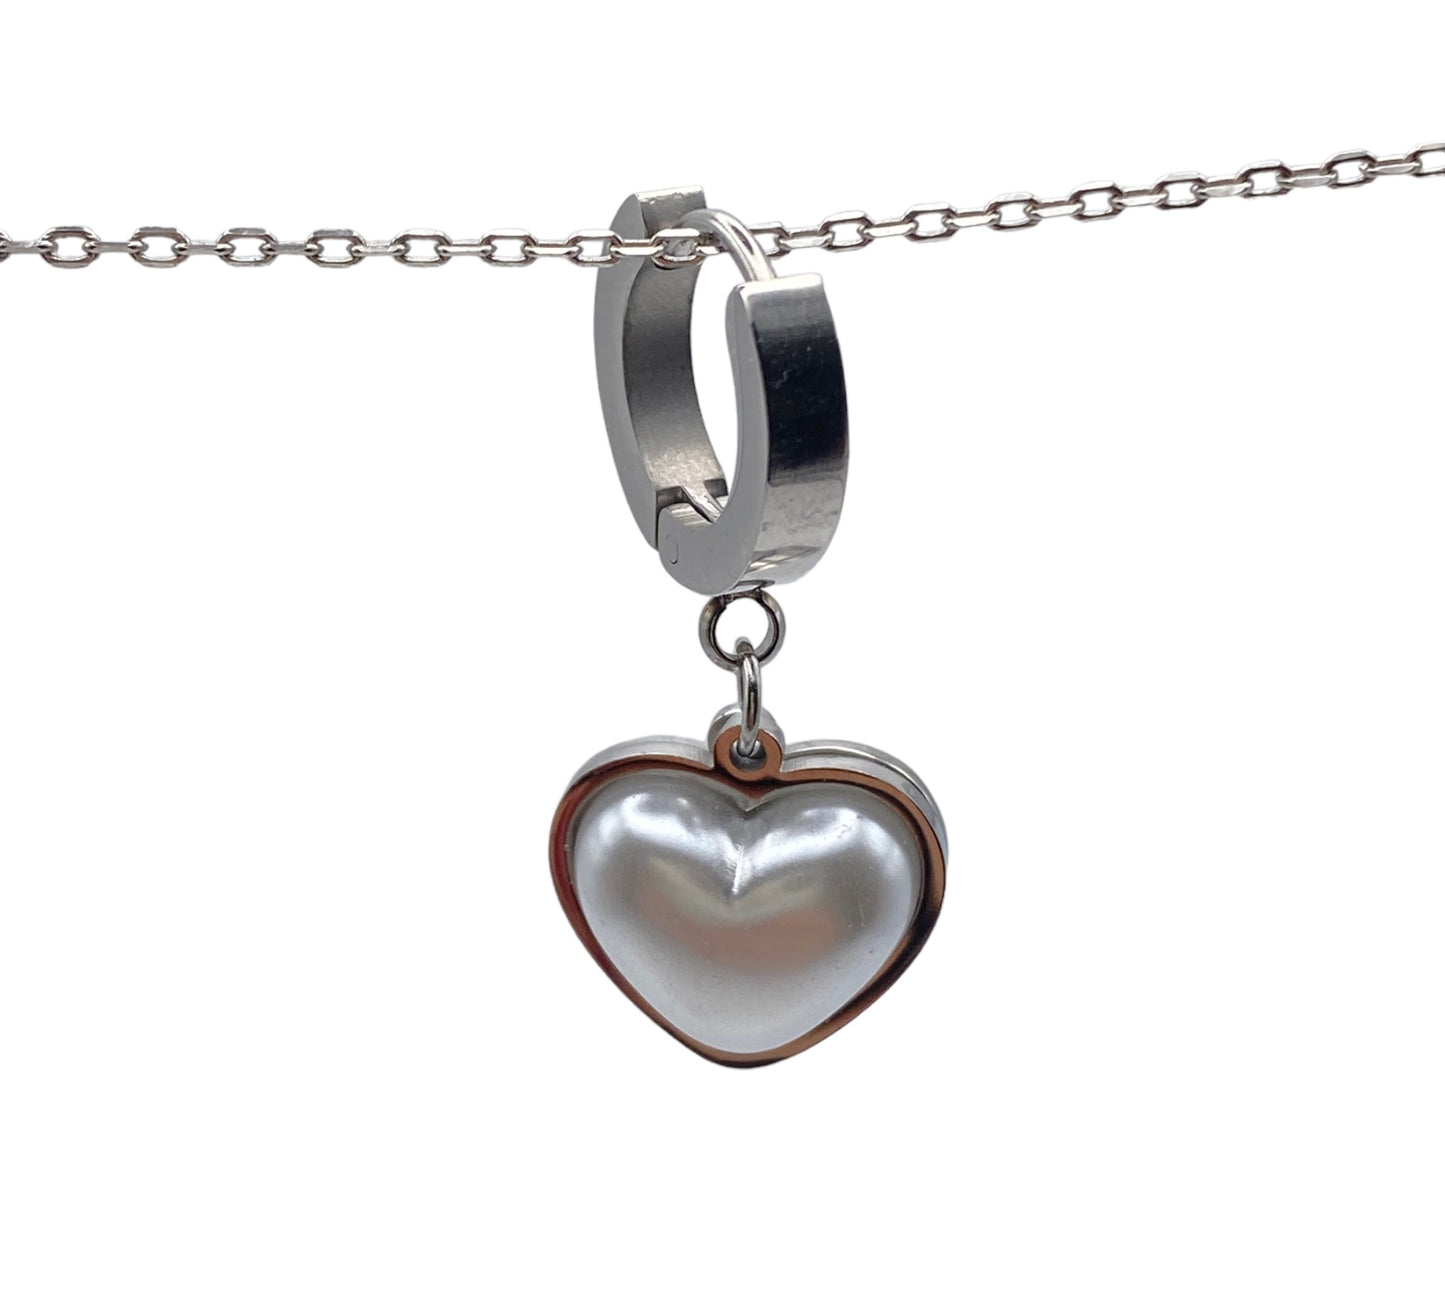 "ISIS" silver colored hoops with a heart shaped pearl pendant